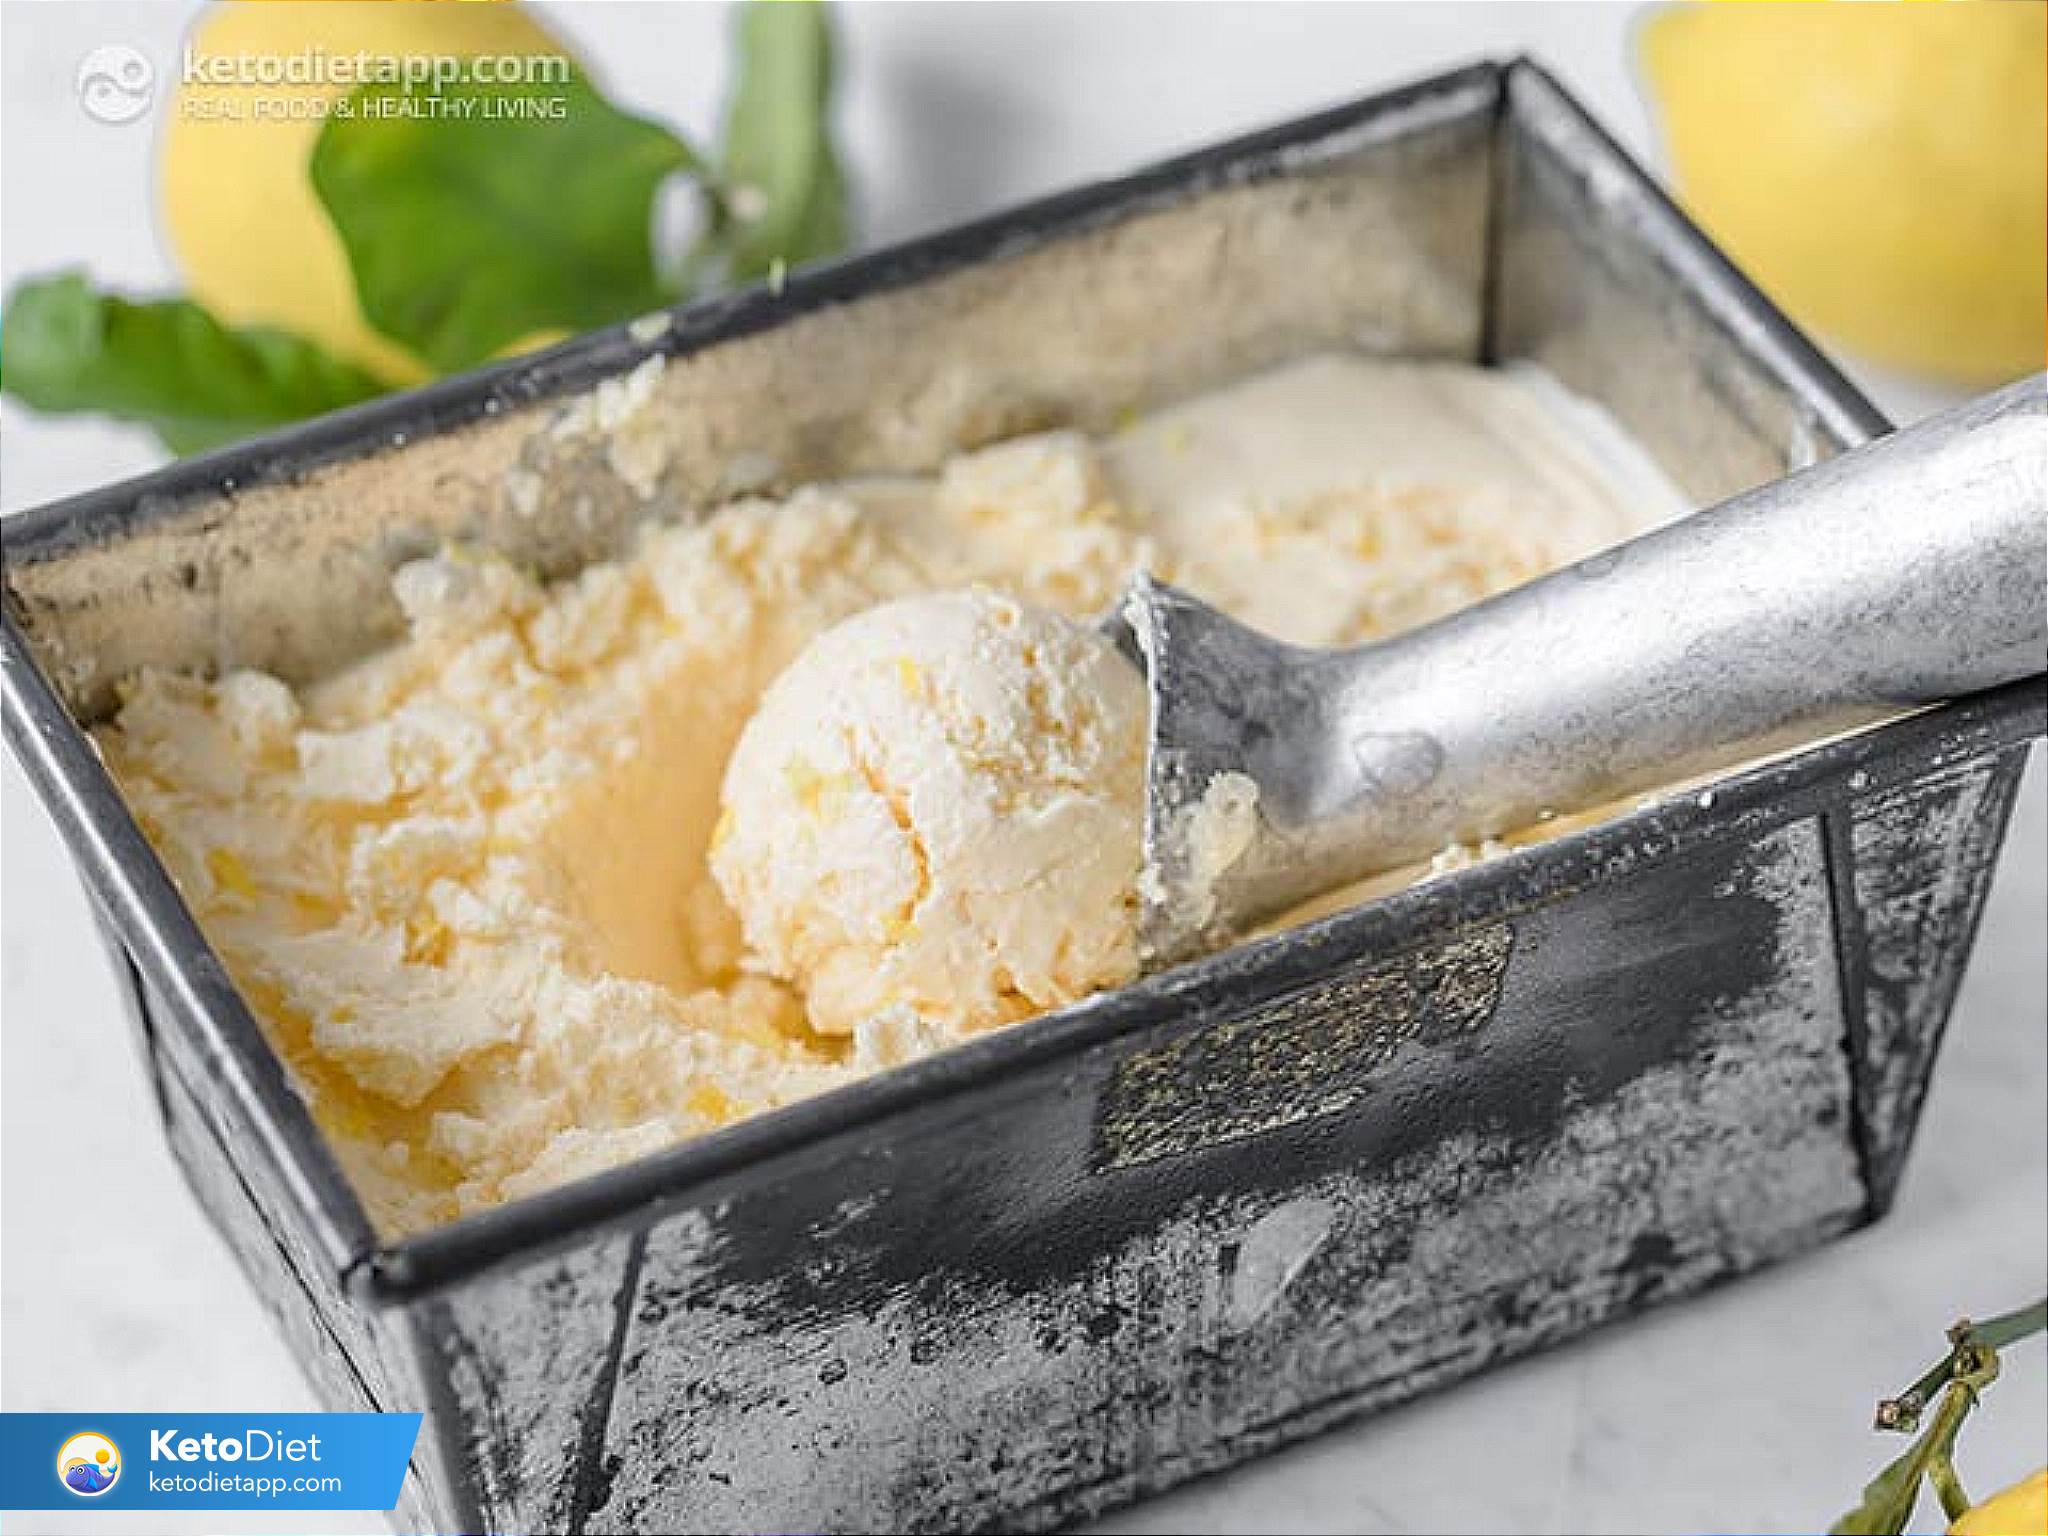 3-Ingredient Ice Cream (without a machine) - Mighty Mrs